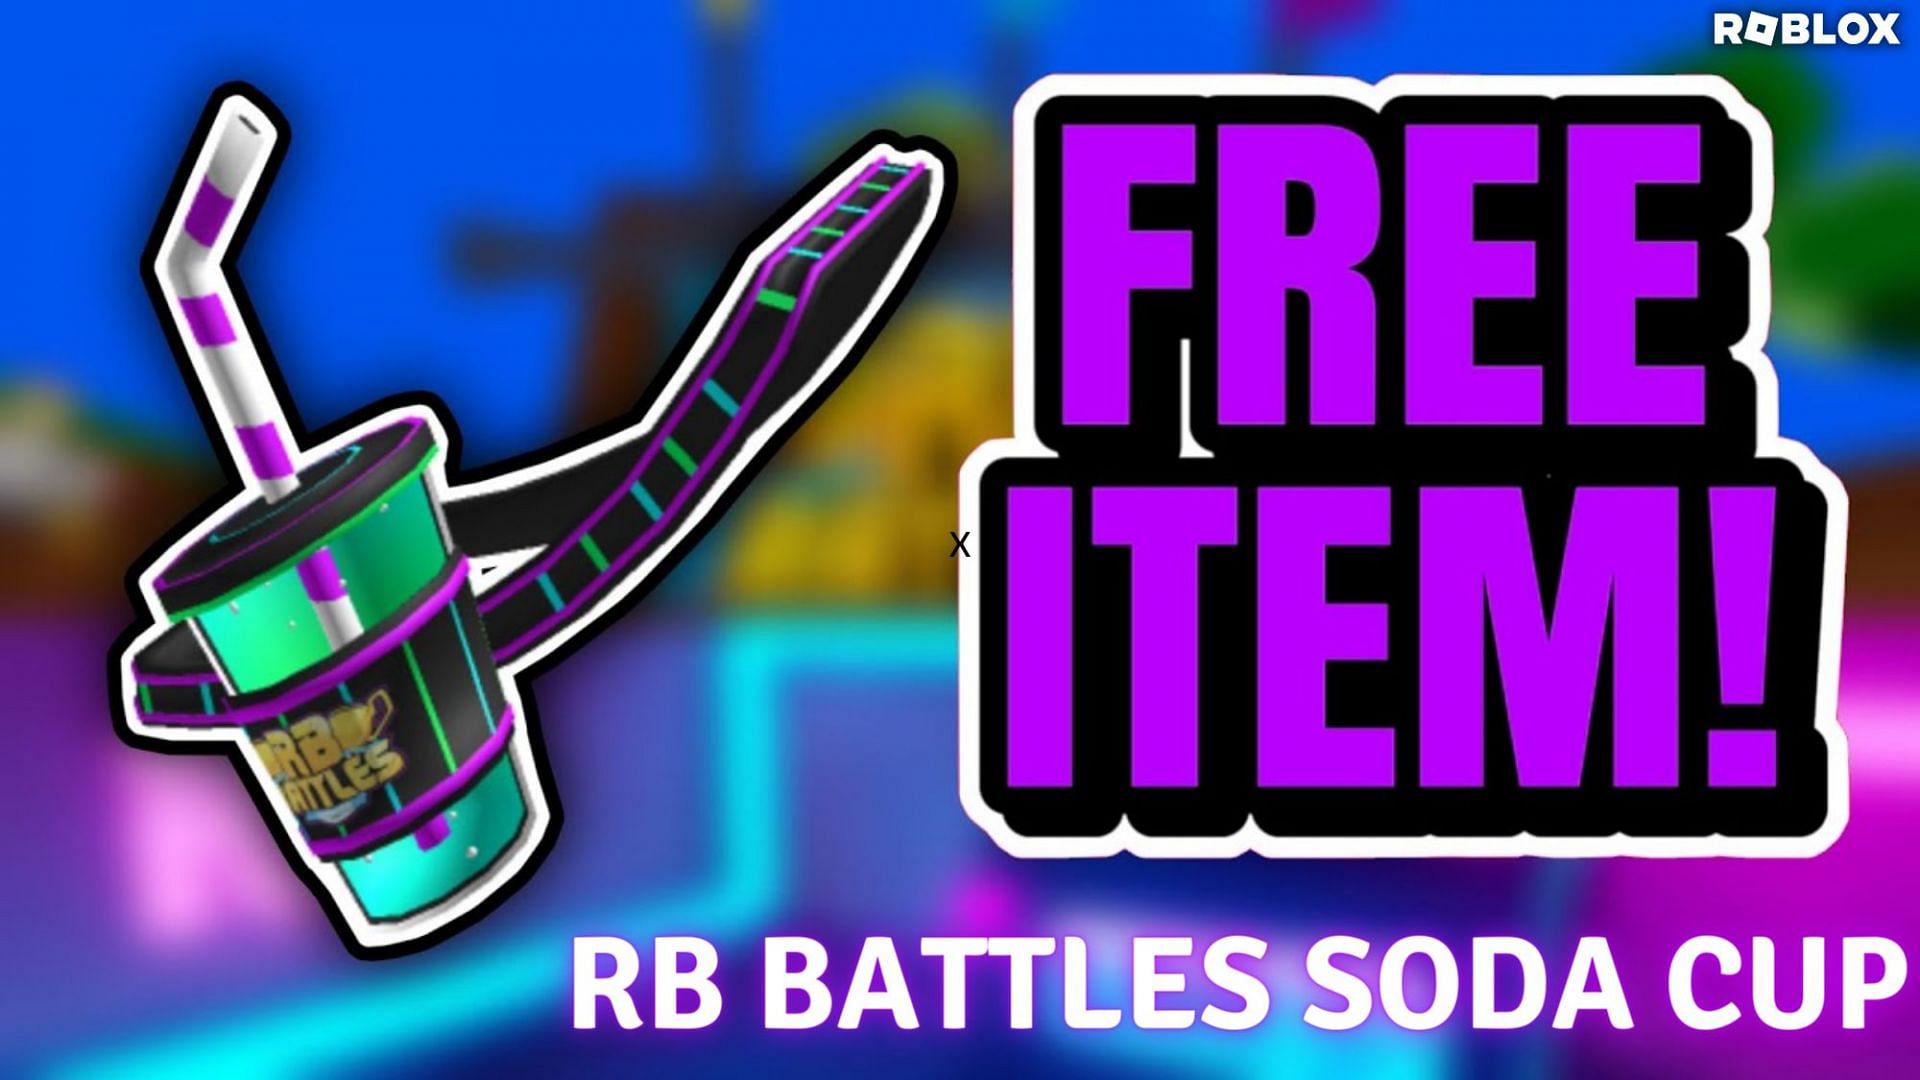 RB Battles Soda Cup for free in Roblox